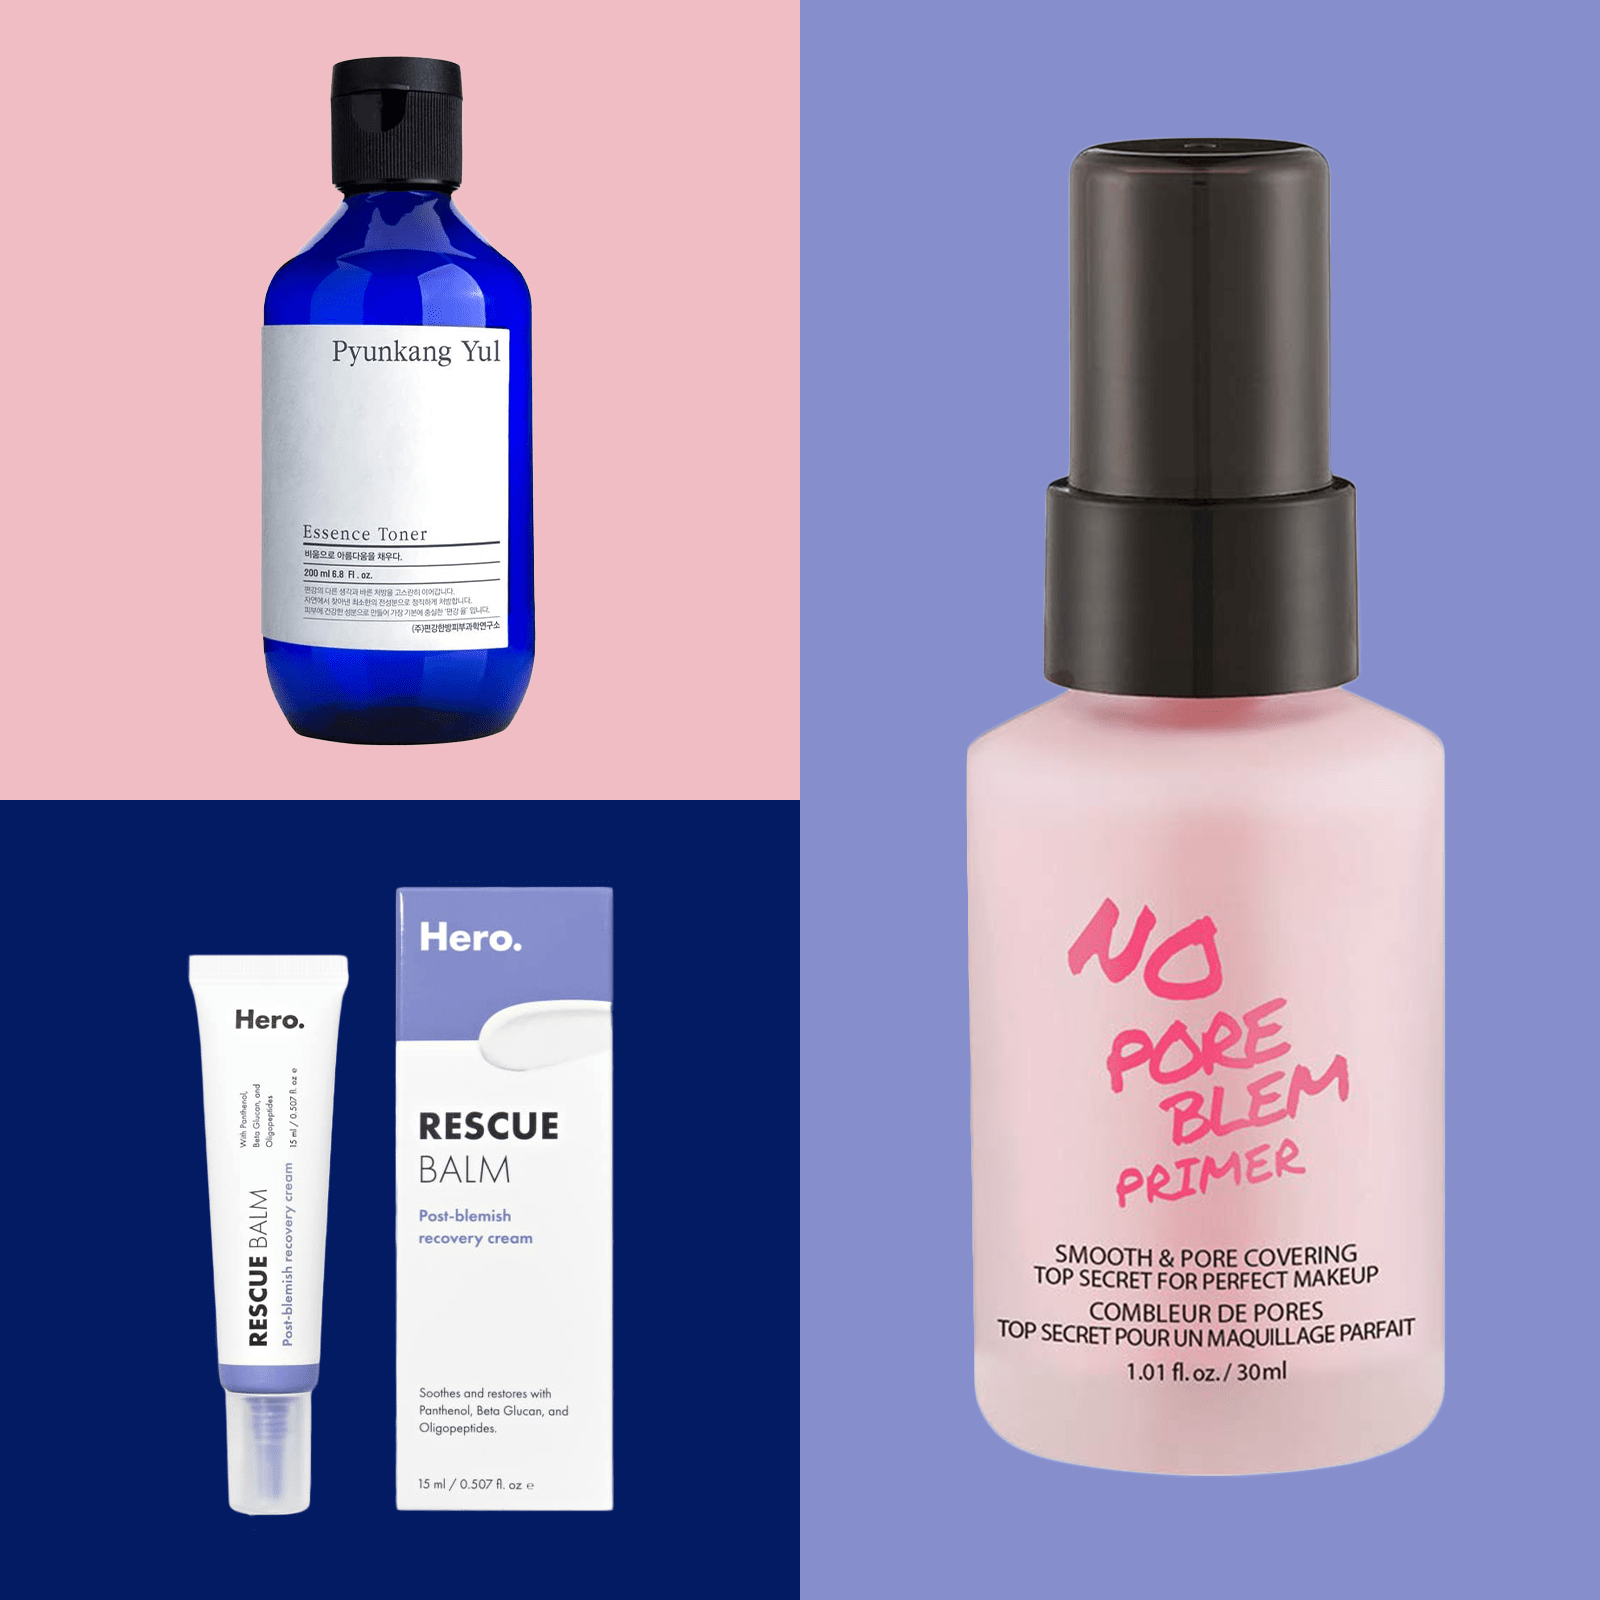 Korean beauty products (… and how you'll never want to use